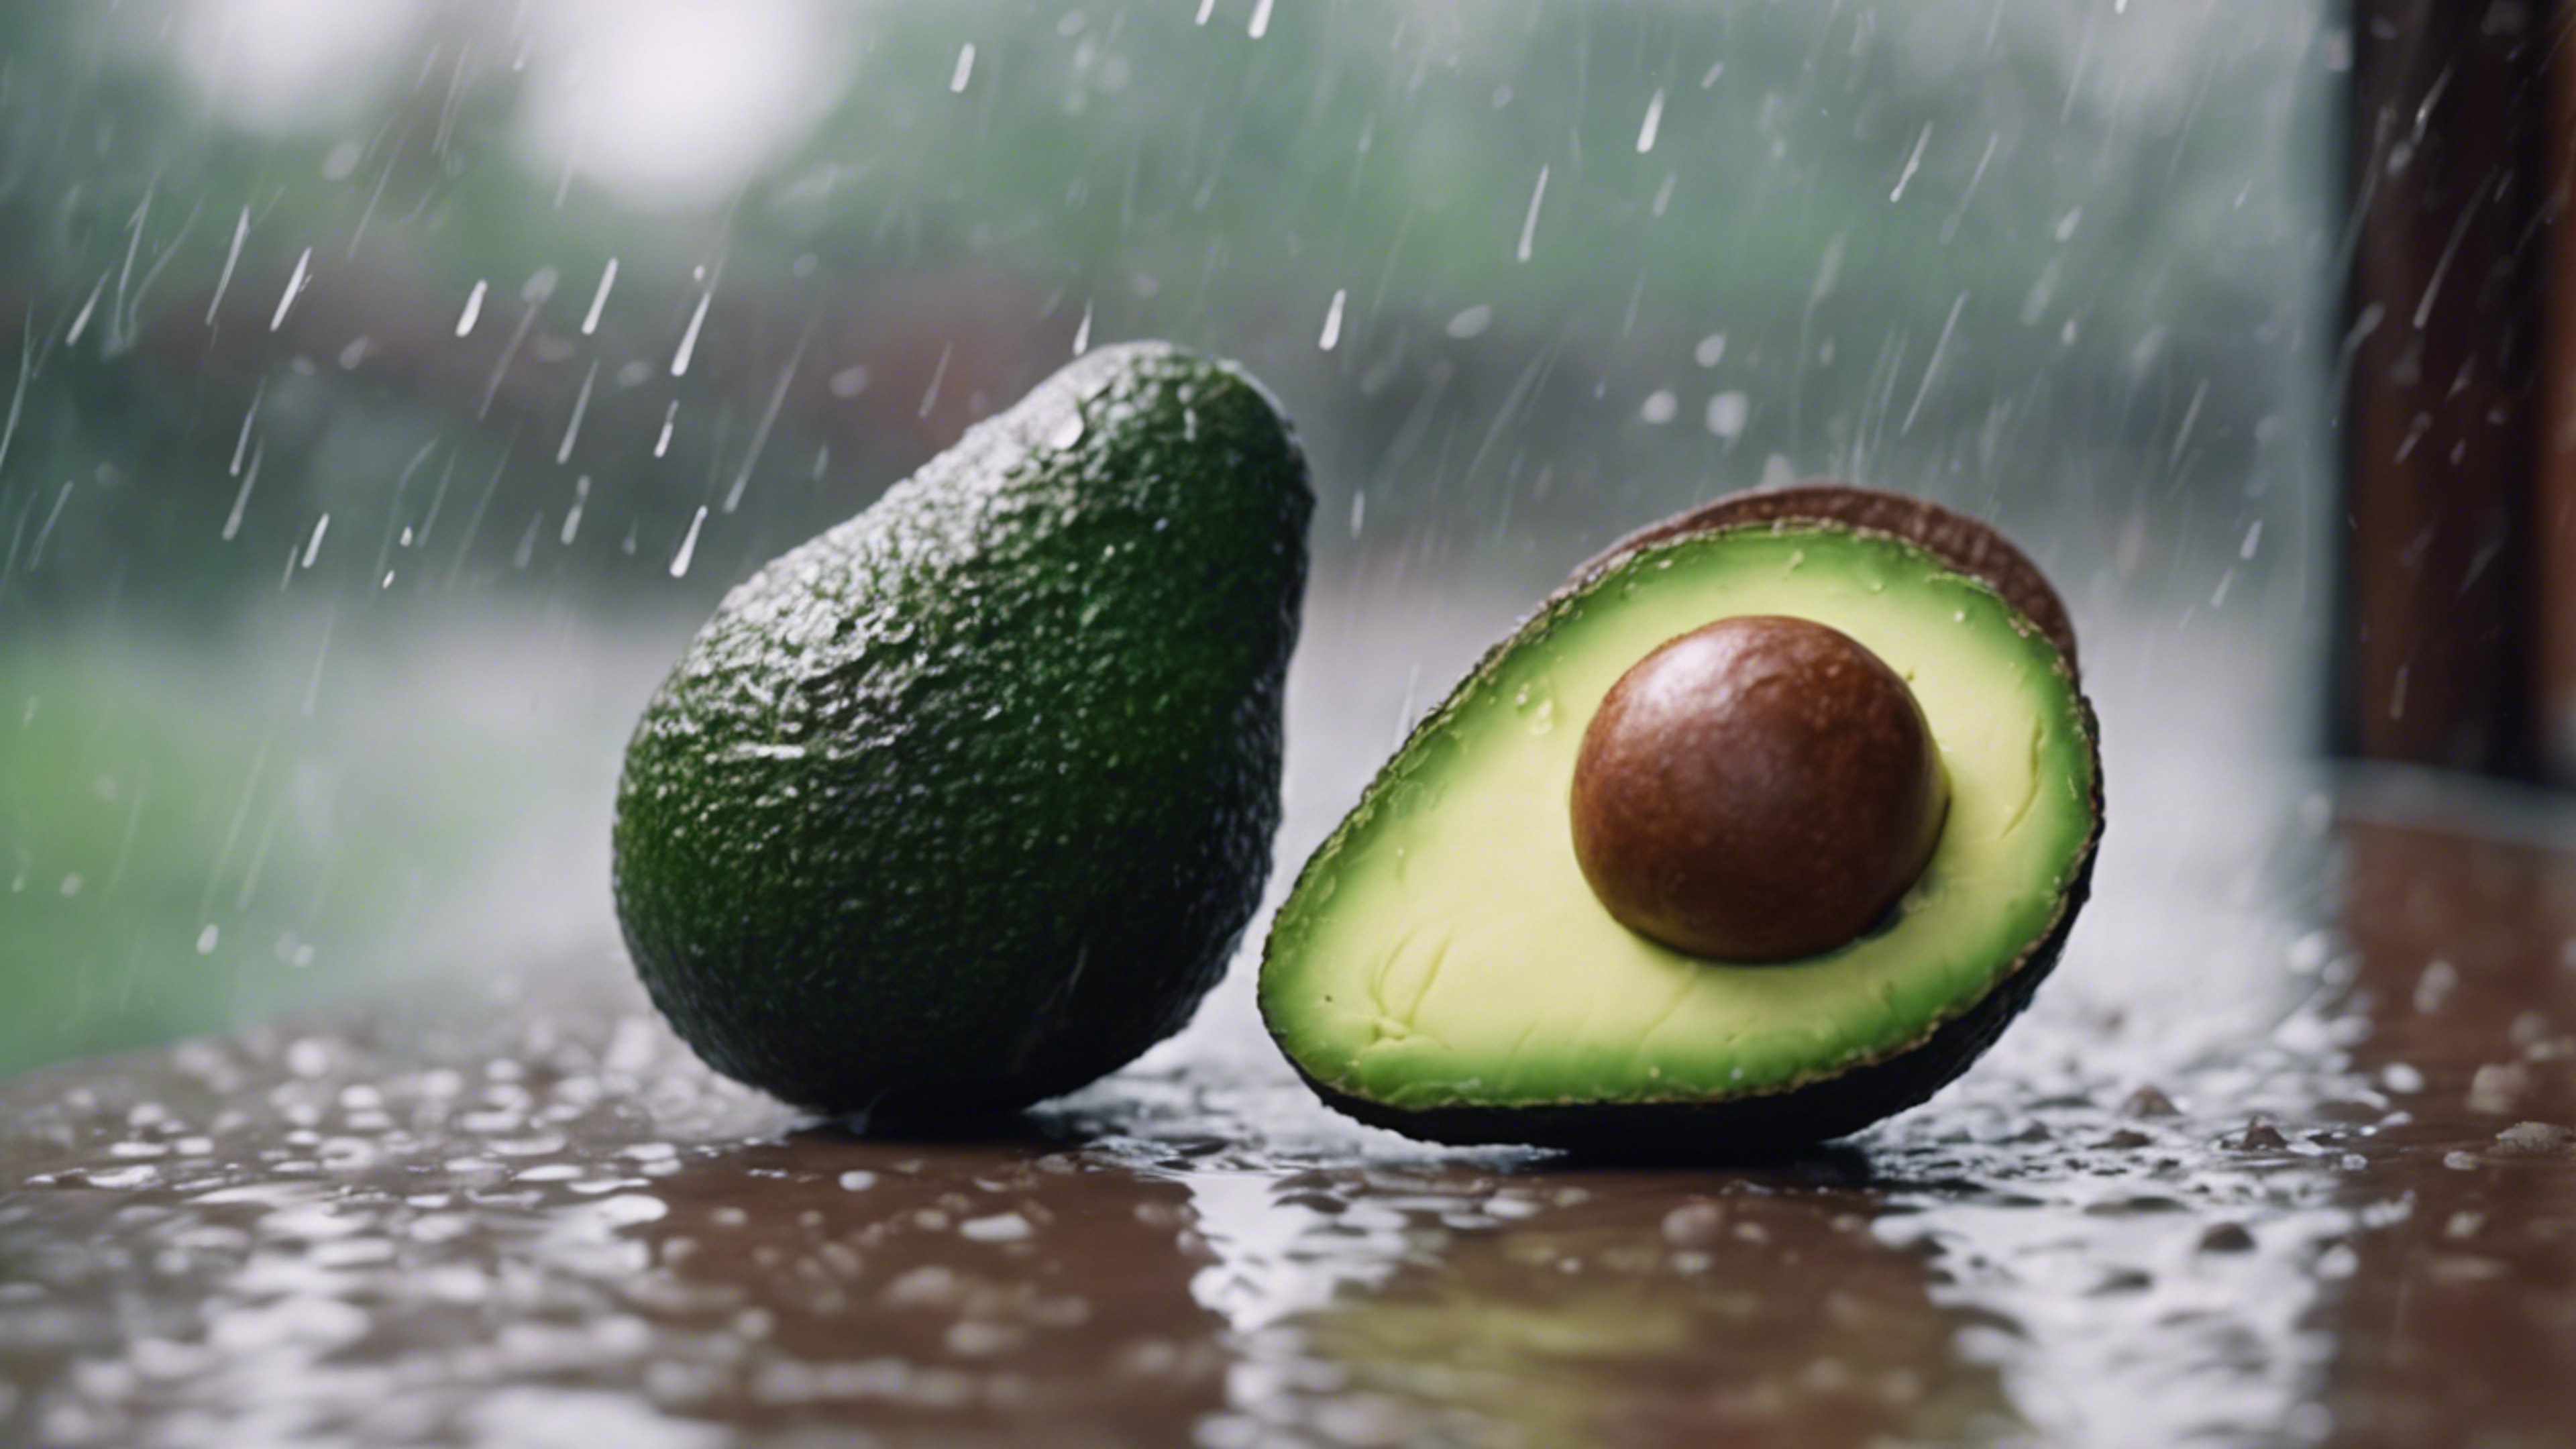 An adorable avocado in a quiet reflection on a rainy day Tapet[1229e2b9e9634c7f8c86]